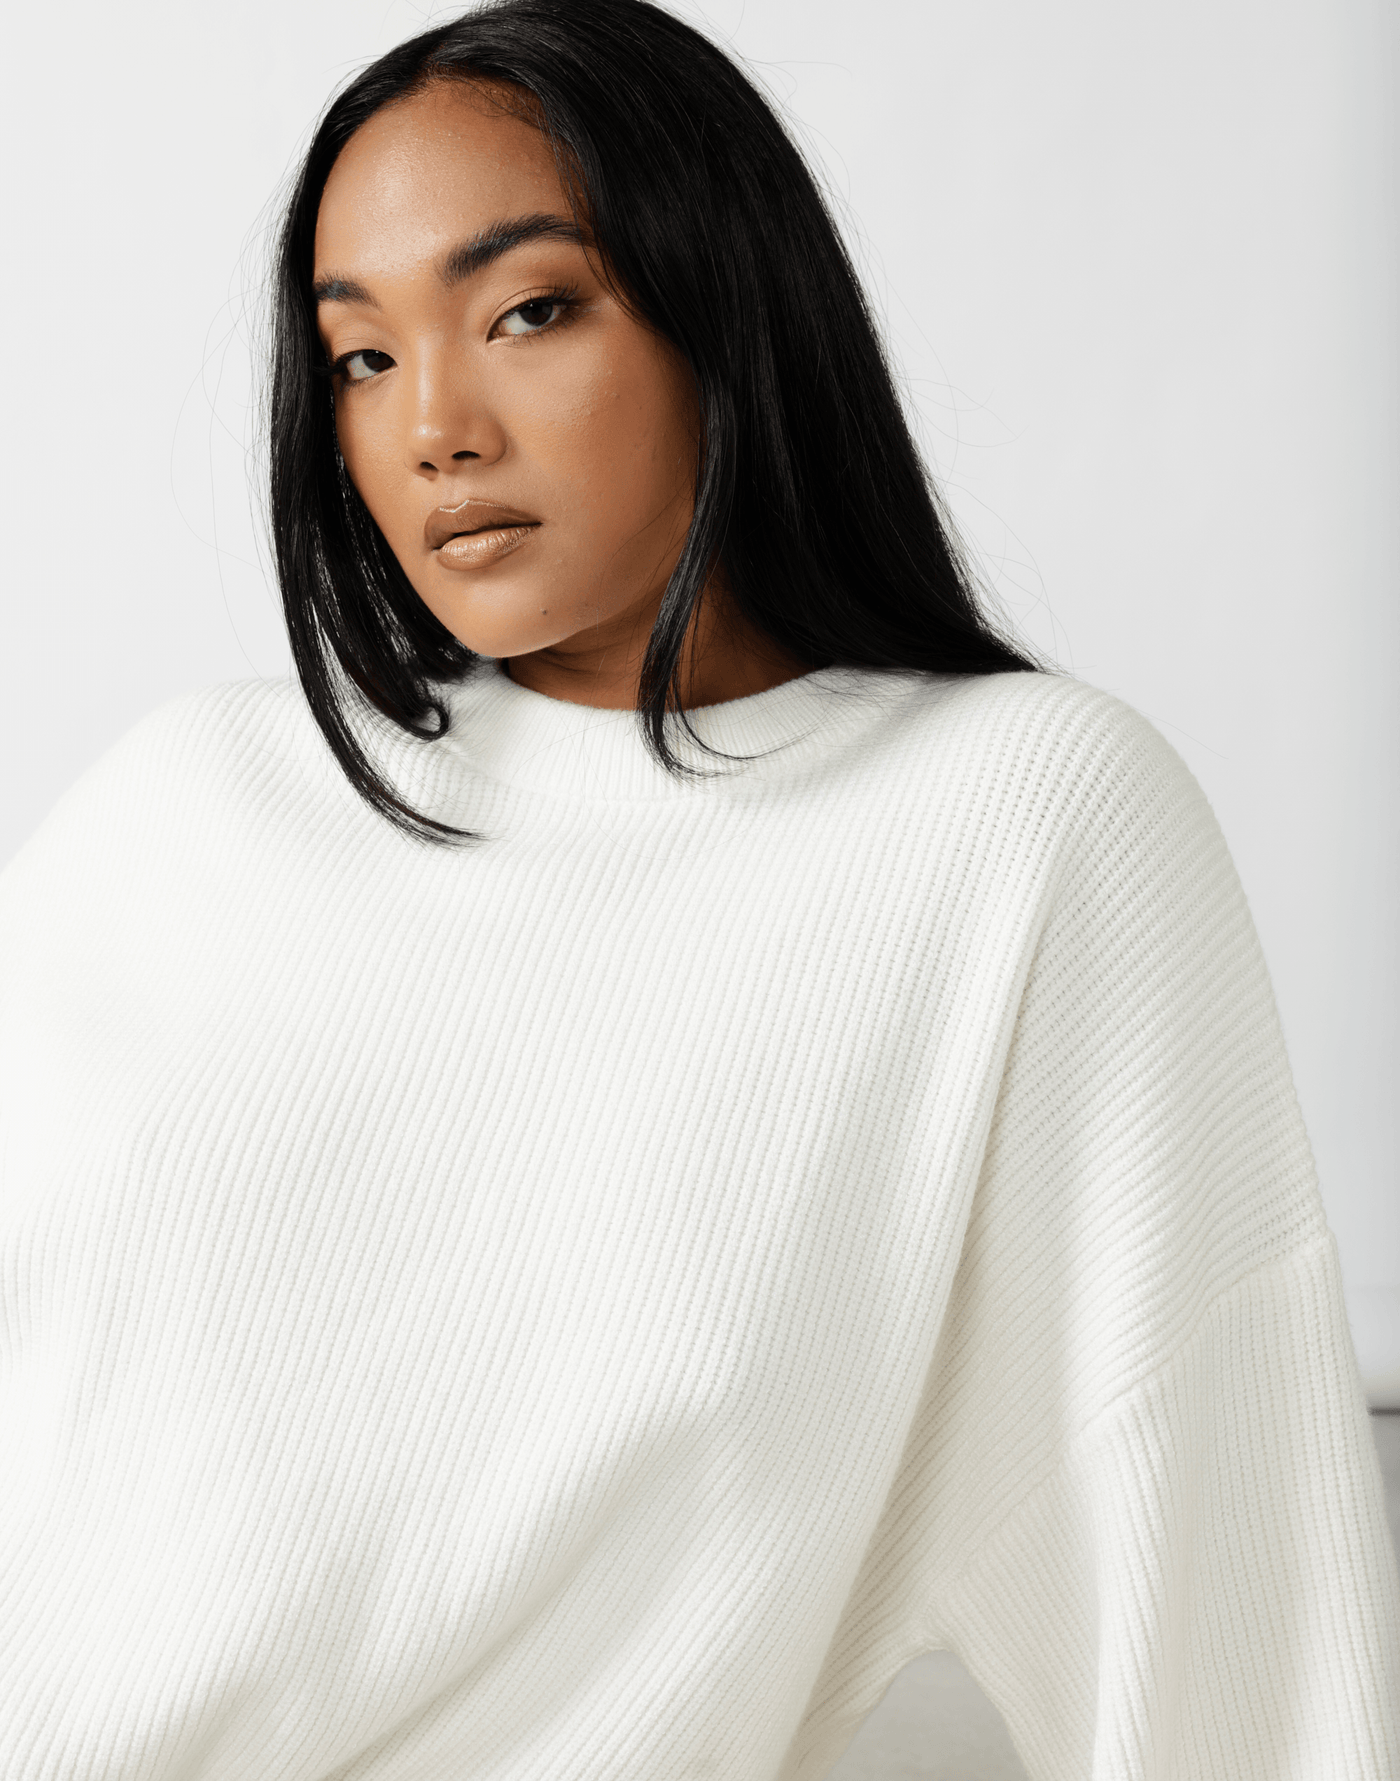 Cody Oversized Jumper (Cream) - Cream Oversized Knit Jumper - Women's Top - Charcoal Clothing